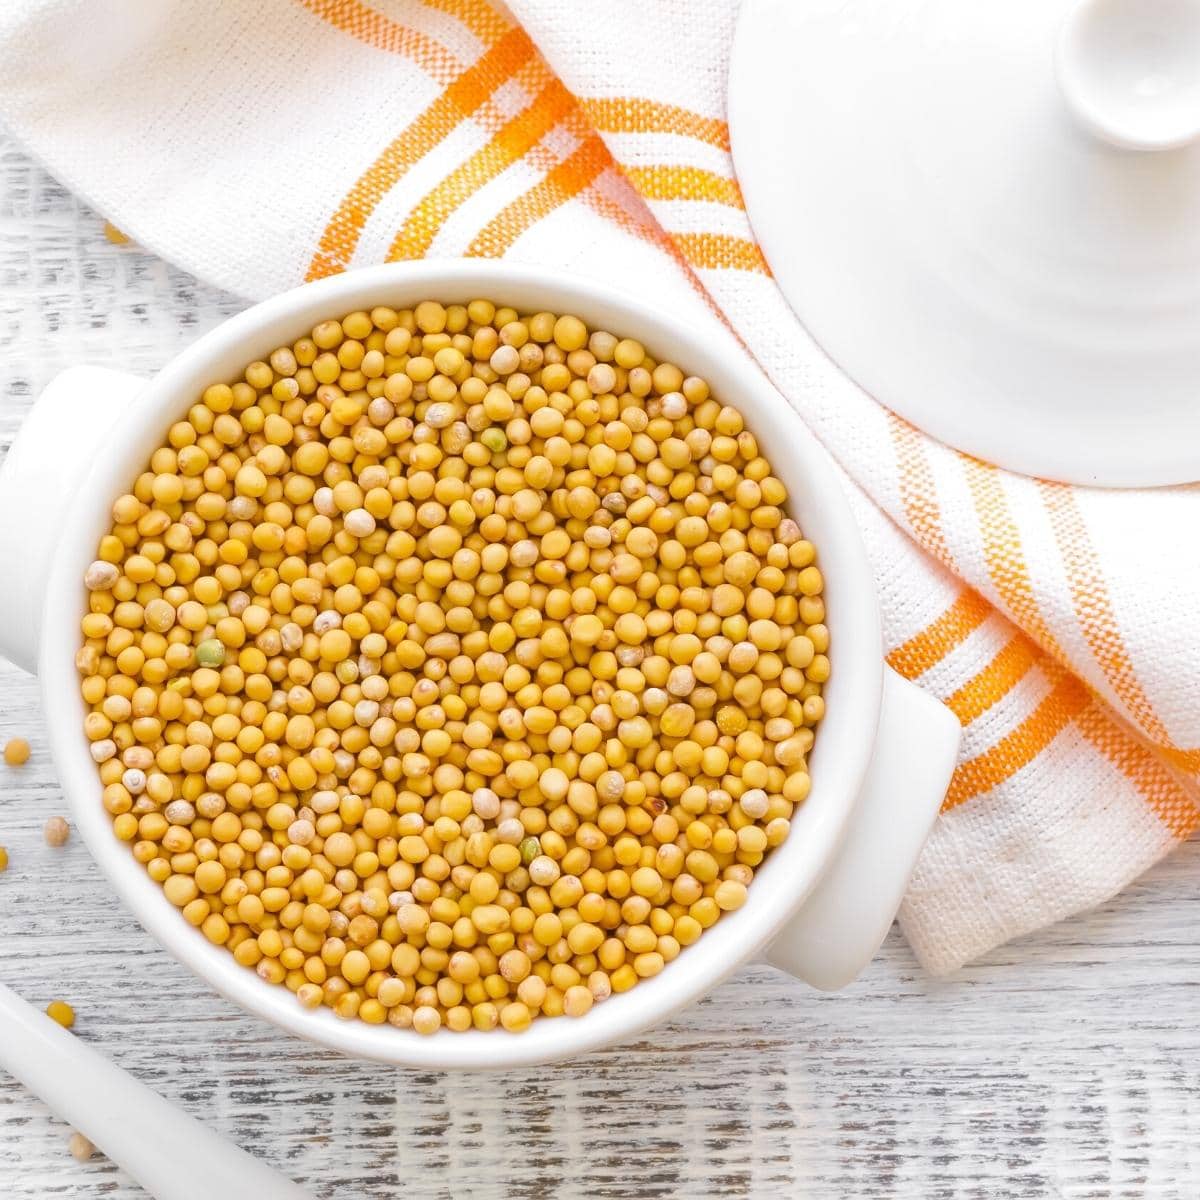 Yellow mustard seeds in a small white ceramic dish.